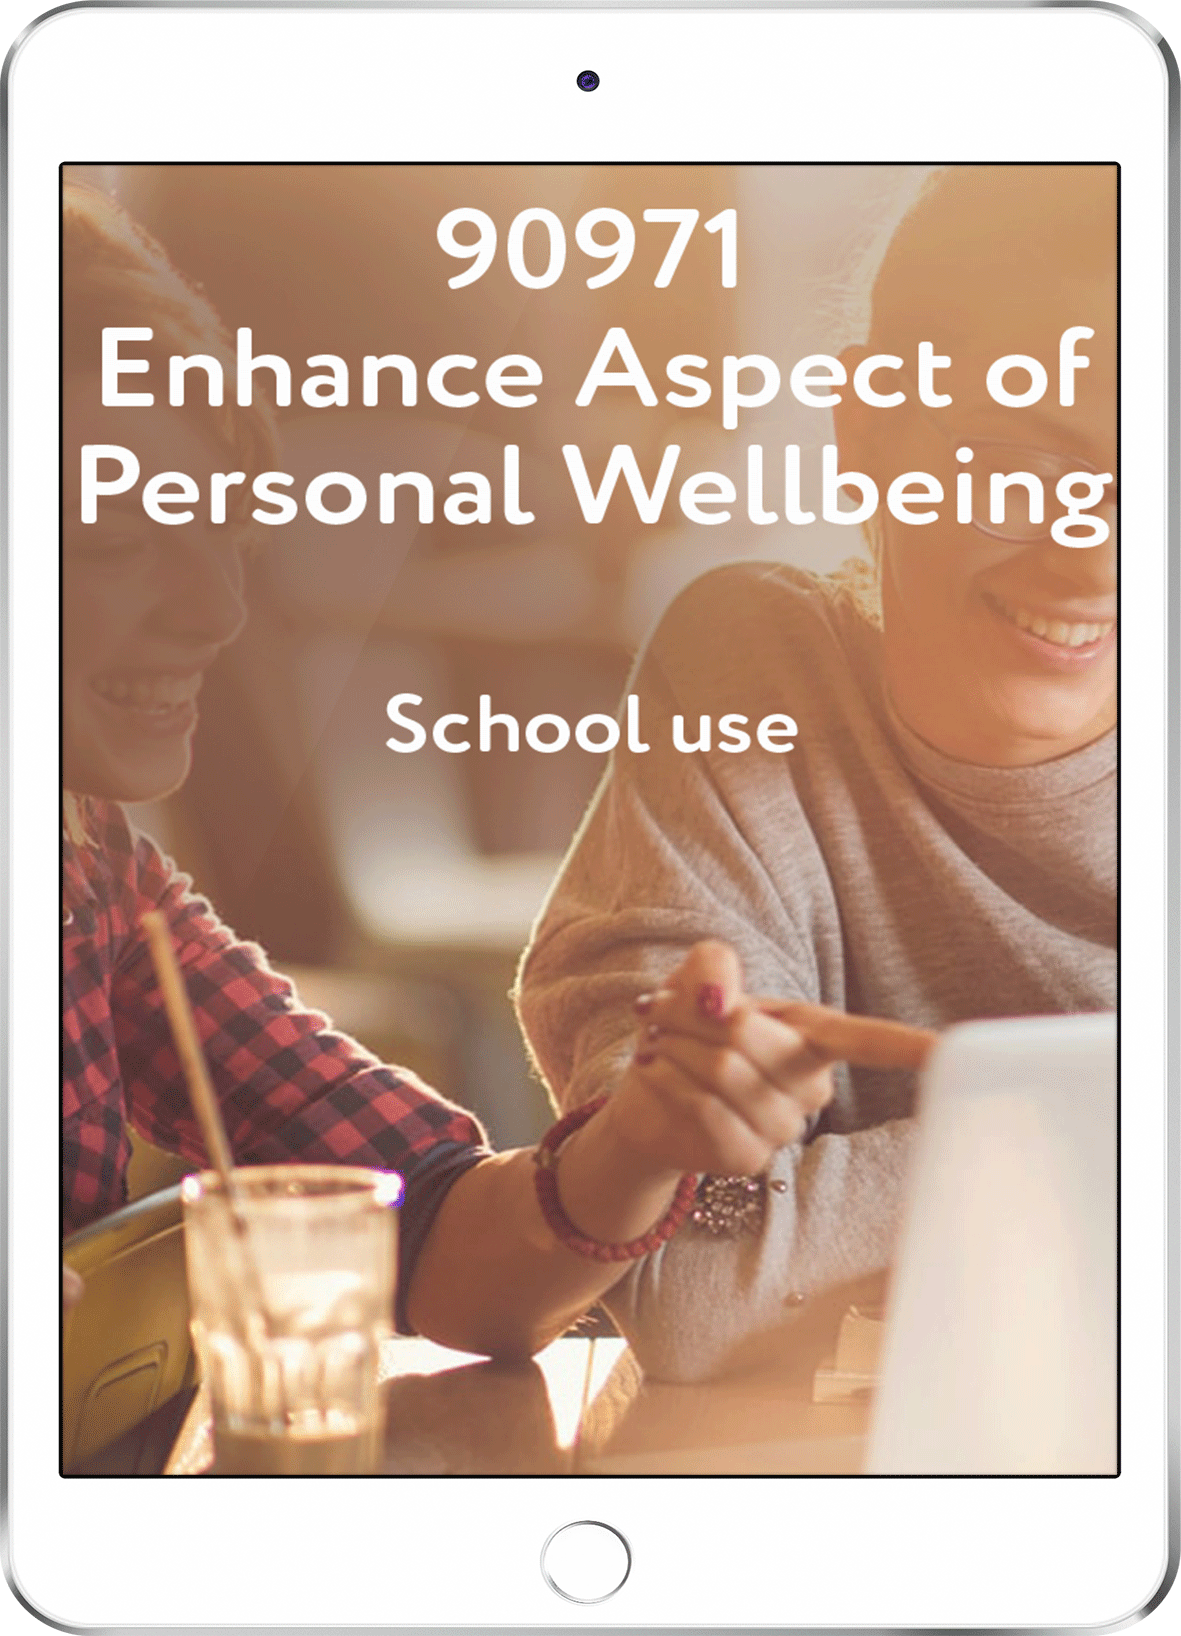 90971 Enhance Aspect of Personal Well-Being - School Use